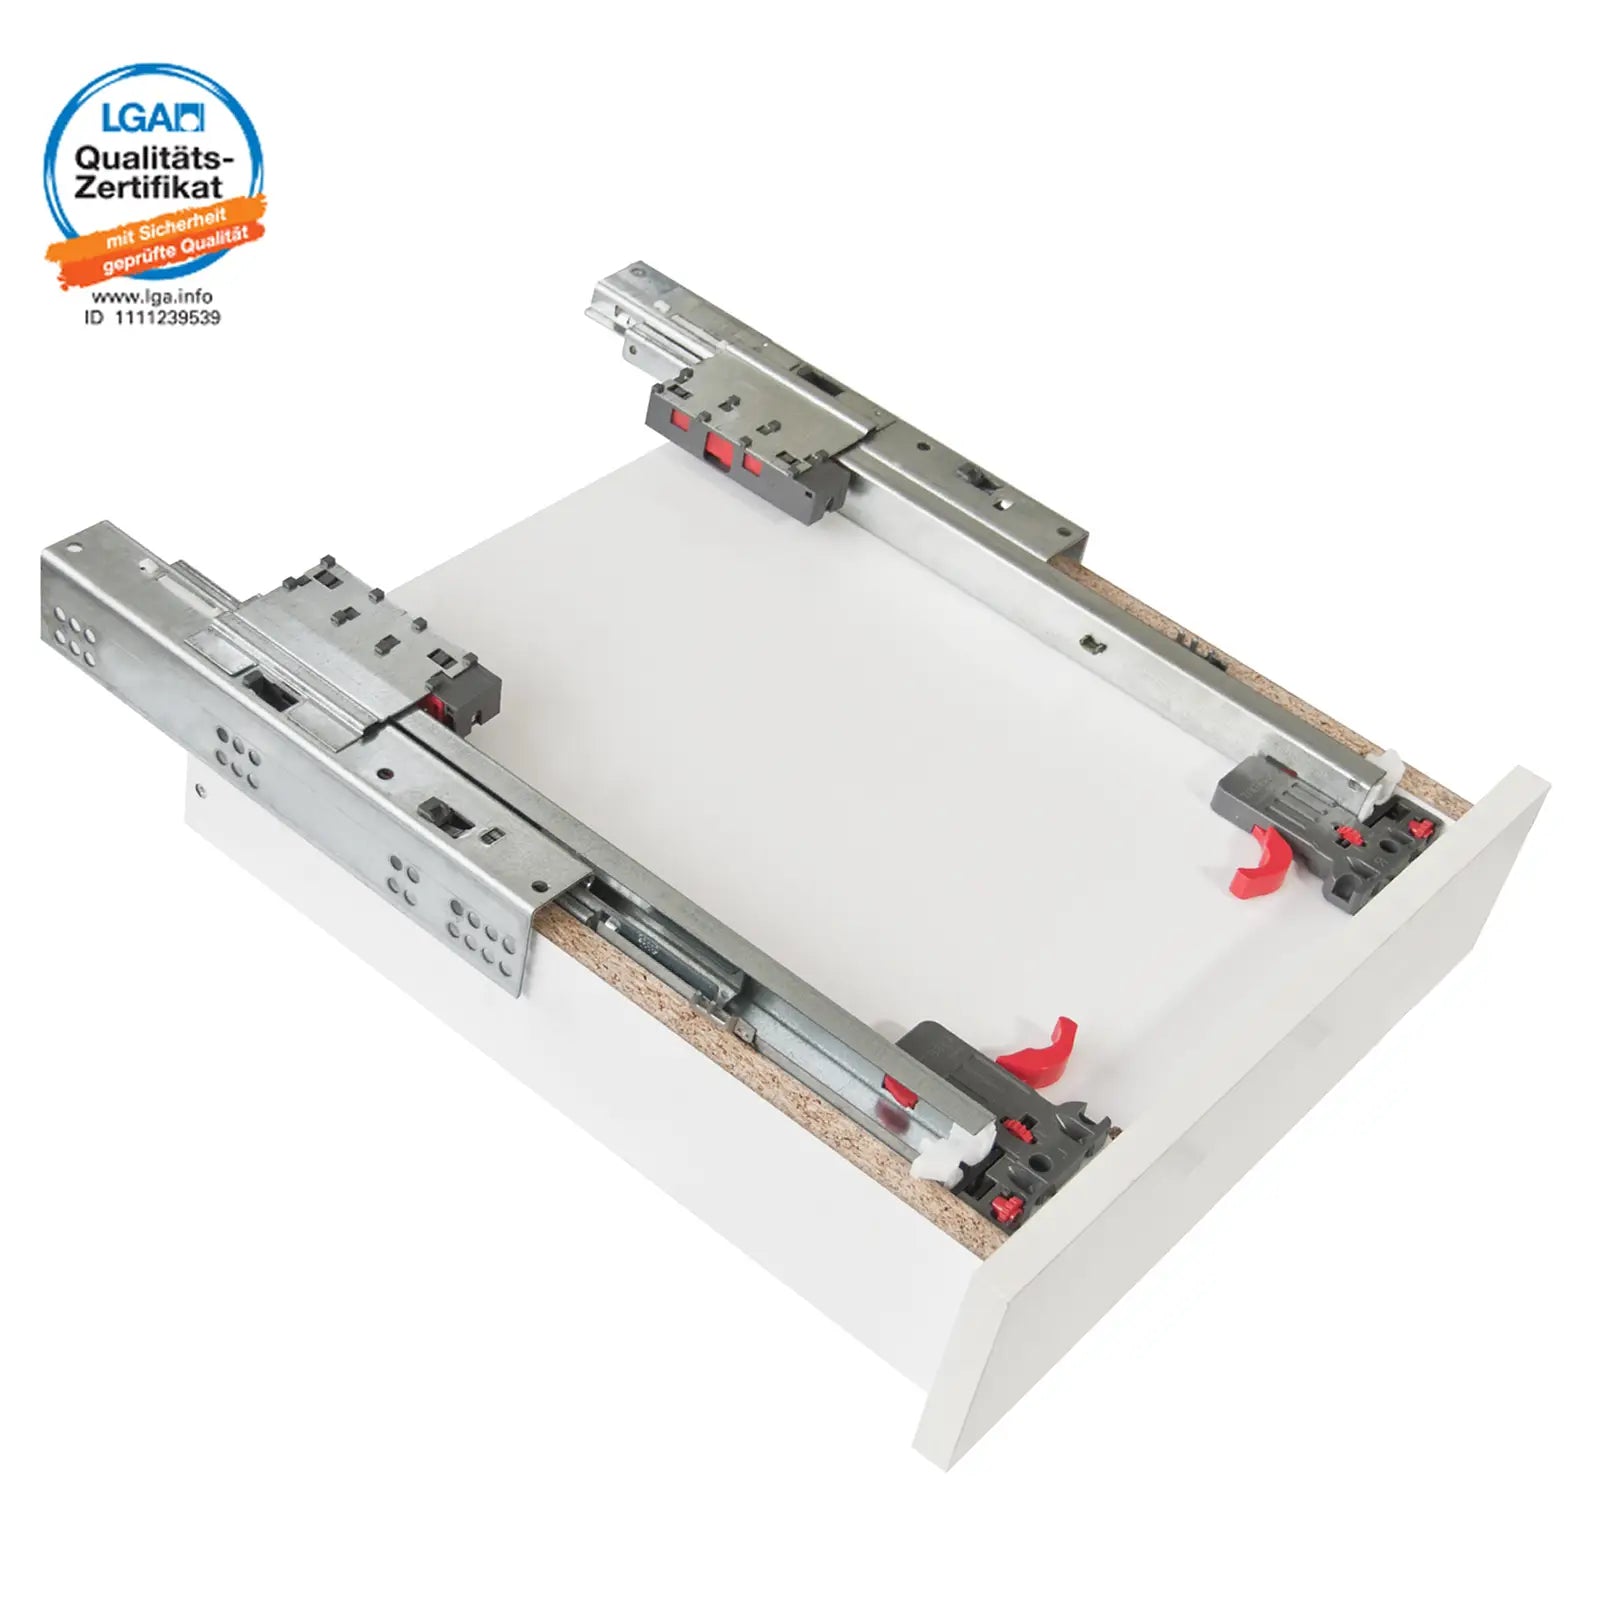 Push To Open Full Extension Undermount Drawer Runners - Decor And Decor